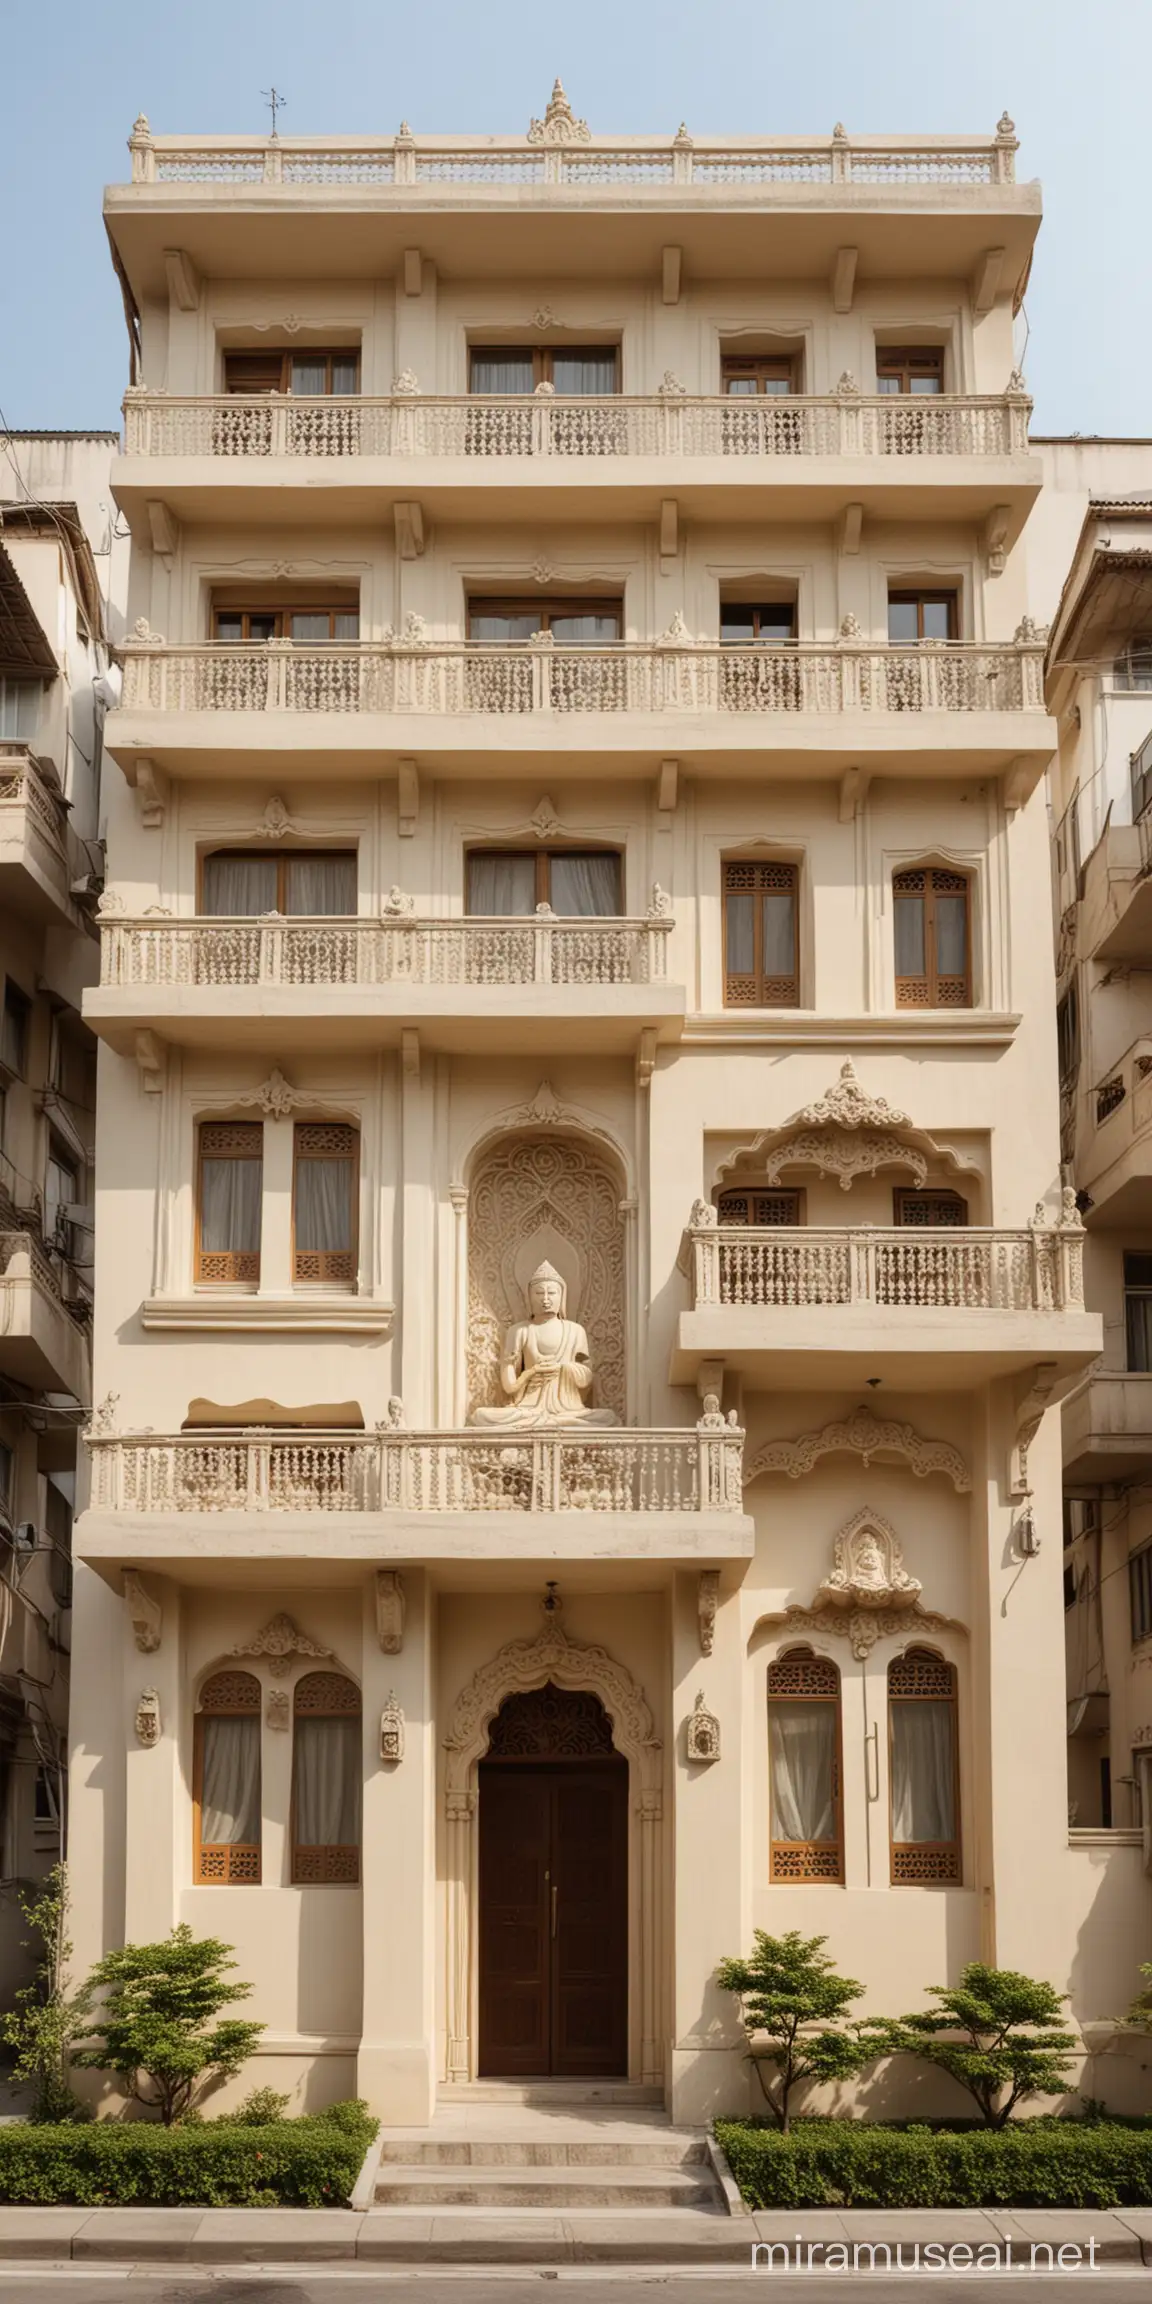 This building stands tall with three floors and an underground parking basement. Its apartments are adorned in a soothing cream color, boasting impressive design with a touch of spirituality. Whether it's subtle Buddhist statues or serene spiritual artwork, these elements add a unique and enchanting vibe to the space.